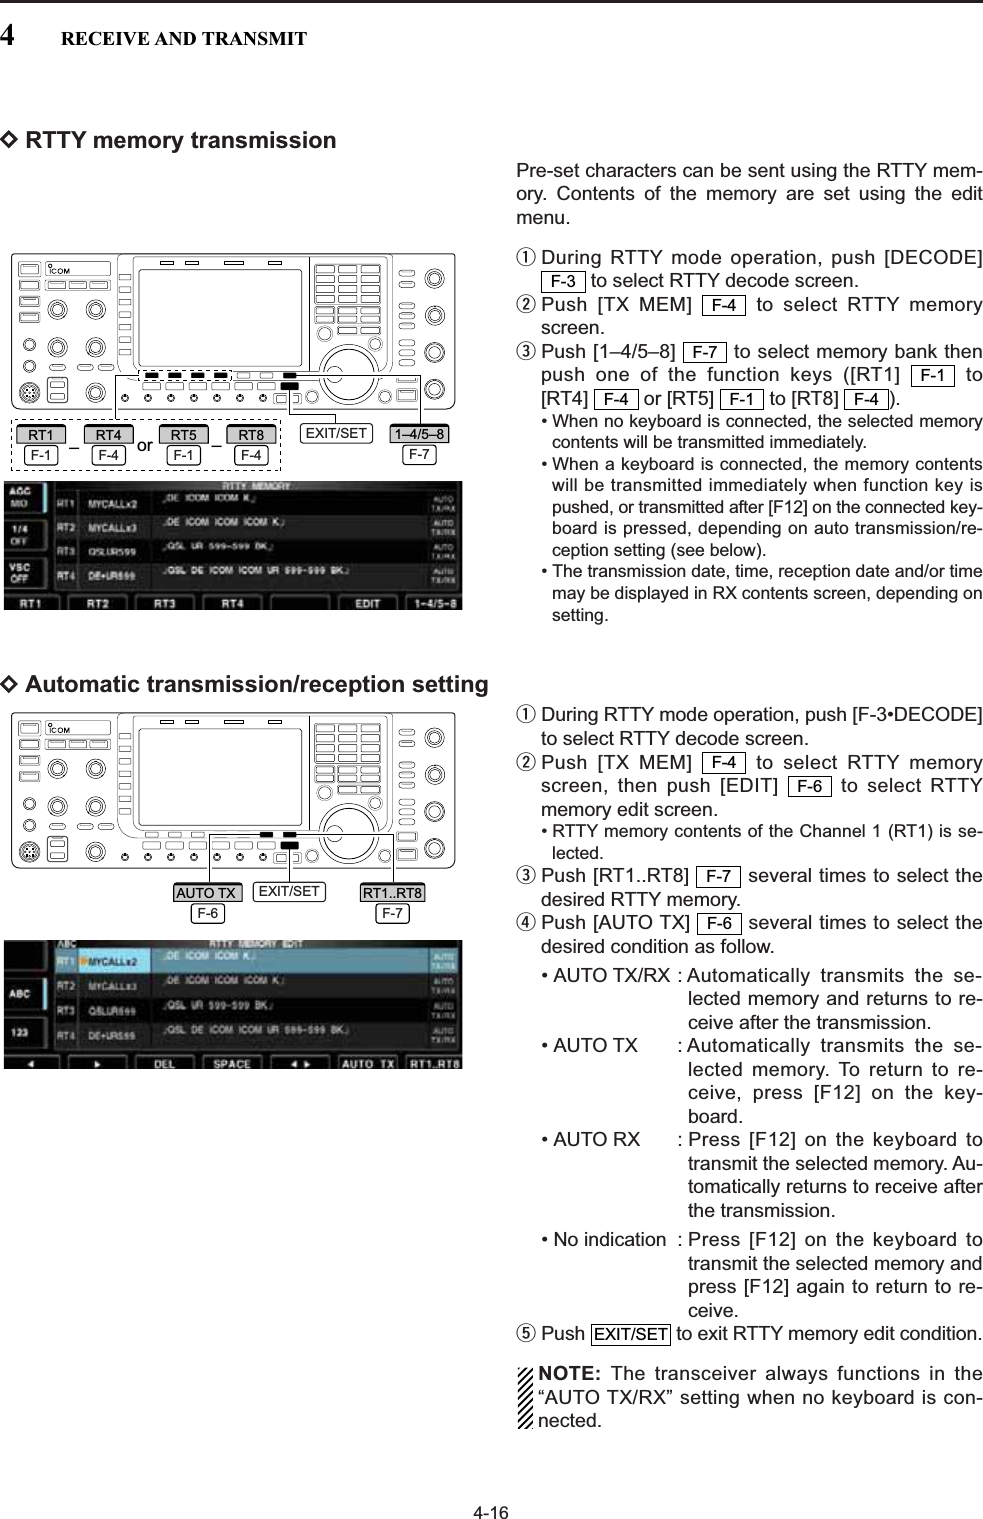 4-16DRTTY memory transmissionPre-set characters can be sent using the RTTY mem-ory. Contents of the memory are set using the editmenu.qDuring RTTY mode operation, push [DECODE]to select RTTY decode screen.wPush [TX MEM]  to select RTTY memoryscreen.ePush [1–4/5–8]  to select memory bank thenpush one of the function keys ([RT1]  to [RT4] or [RT5] to [RT8] ). • When no keyboard is connected, the selected memorycontents will be transmitted immediately.• When a keyboard is connected, the memory contentswill be transmitted immediately when function key ispushed, or transmitted after [F12] on the connected key-board is pressed, depending on auto transmission/re-ception setting (see below).• The transmission date, time, reception date and/or timemay be displayed in RX contents screen, depending onsetting.DAutomatic transmission/reception settingqDuring RTTY mode operation, push [F-3•DECODE]to select RTTY decode screen.wPush [TX MEM]  to select RTTY memoryscreen, then push [EDIT]  to select RTTYmemory edit screen.• RTTY memory contents of the Channel 1 (RT1) is se-lected.ePush [RT1..RT8]  several times to select thedesired RTTY memory.rPush [AUTO TX]  several times to select thedesired condition as follow.• AUTO TX/RX : Automatically transmits the se-lected memory and returns to re-ceive after the transmission.• AUTO TX : Automatically transmits the se-lected memory. To return to re-ceive, press [F12] on the key-board.• AUTO RX : Press [F12] on the keyboard totransmit the selected memory. Au-tomatically returns to receive afterthe transmission.• No indication : Press [F12] on the keyboard totransmit the selected memory andpress [F12] again to return to re-ceive.tPush  to exit RTTY memory edit condition.NOTE: The transceiver always functions in the“AUTO TX/RX” setting when no keyboard is con-nected.EXIT/SETF-6F-7F-6F-4F-4F-1F-4F-1F-7F-4F-3EXIT/SETF-7RT1..RT8F-6AUTO TX ––or F-71–4/5–8F-1RT1F-4RT4F-1RT5F-4RT8 EXIT/SET4RECEIVE AND TRANSMIT